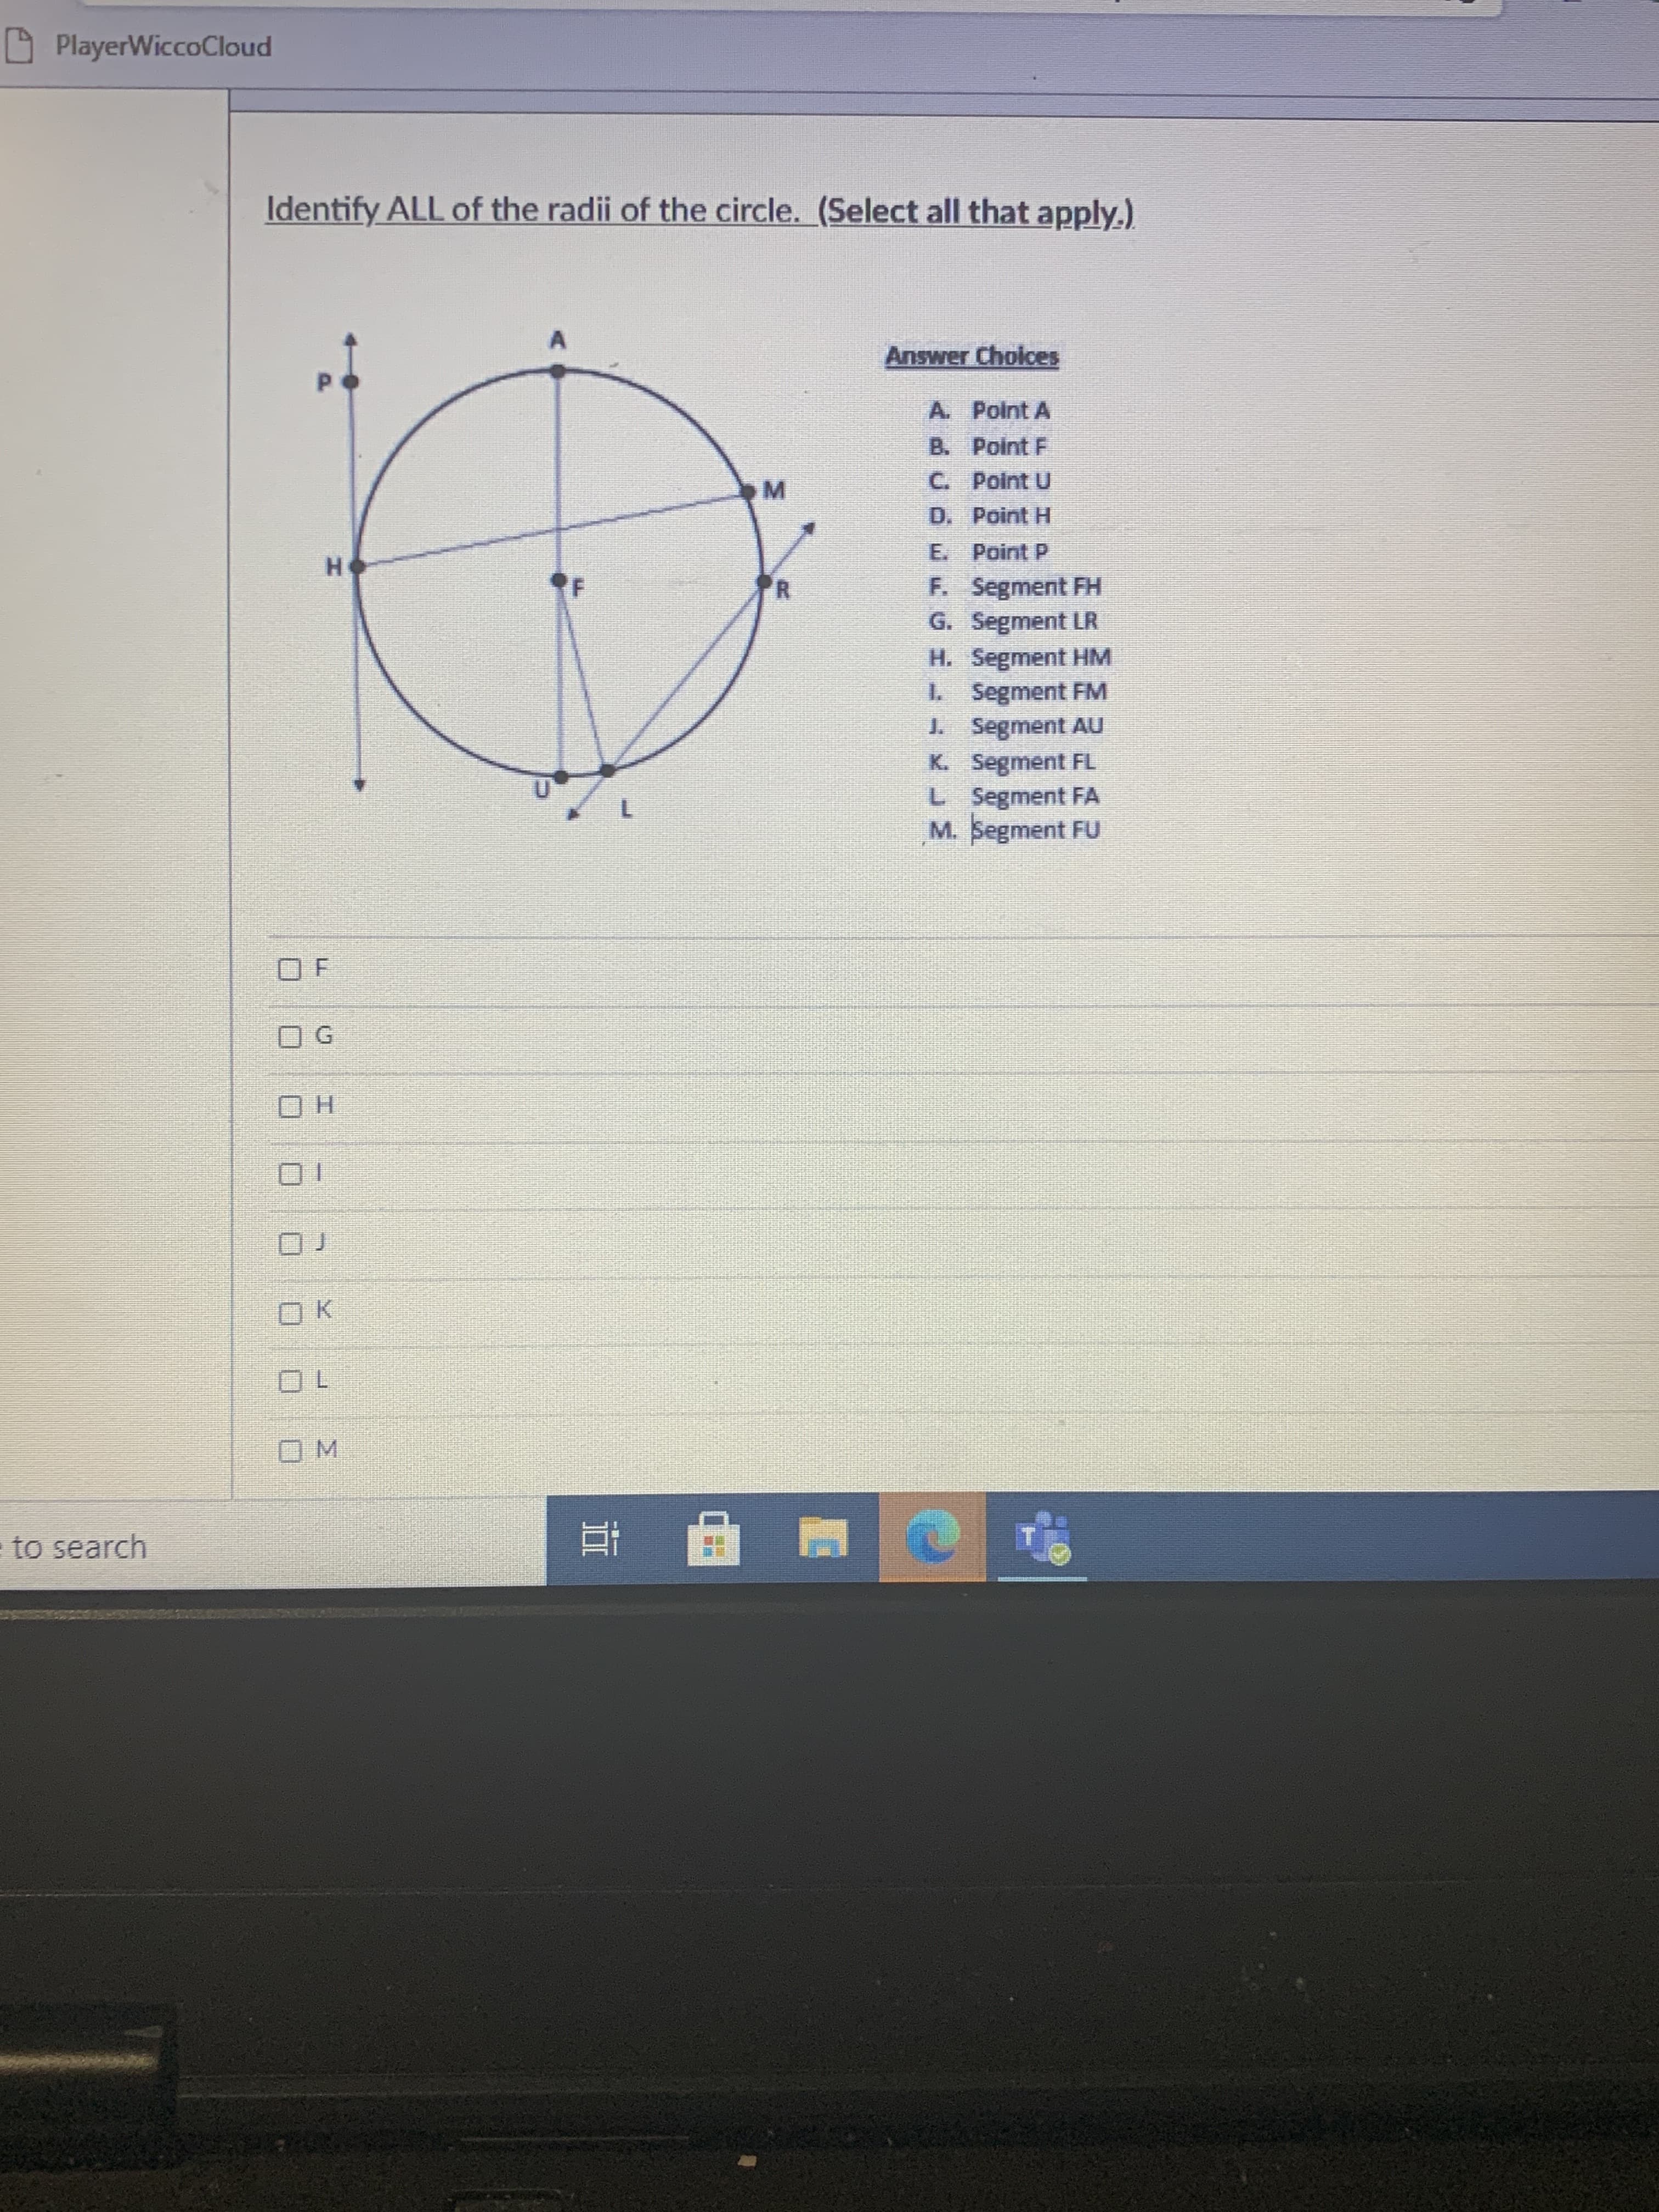 Identify ALL of the radii of the circle. (Select all that apply.)
Answer Cholces
P.
A. Point A
B. Point F
C. Point U
D. Point H
E. Point P
H.
RF
F. Segment FH
G. Segment LR
H. Segment HM
I. Segment FM
J. Segment AU
K. Segment FL
L Segment FA
M. Segment FU
R
